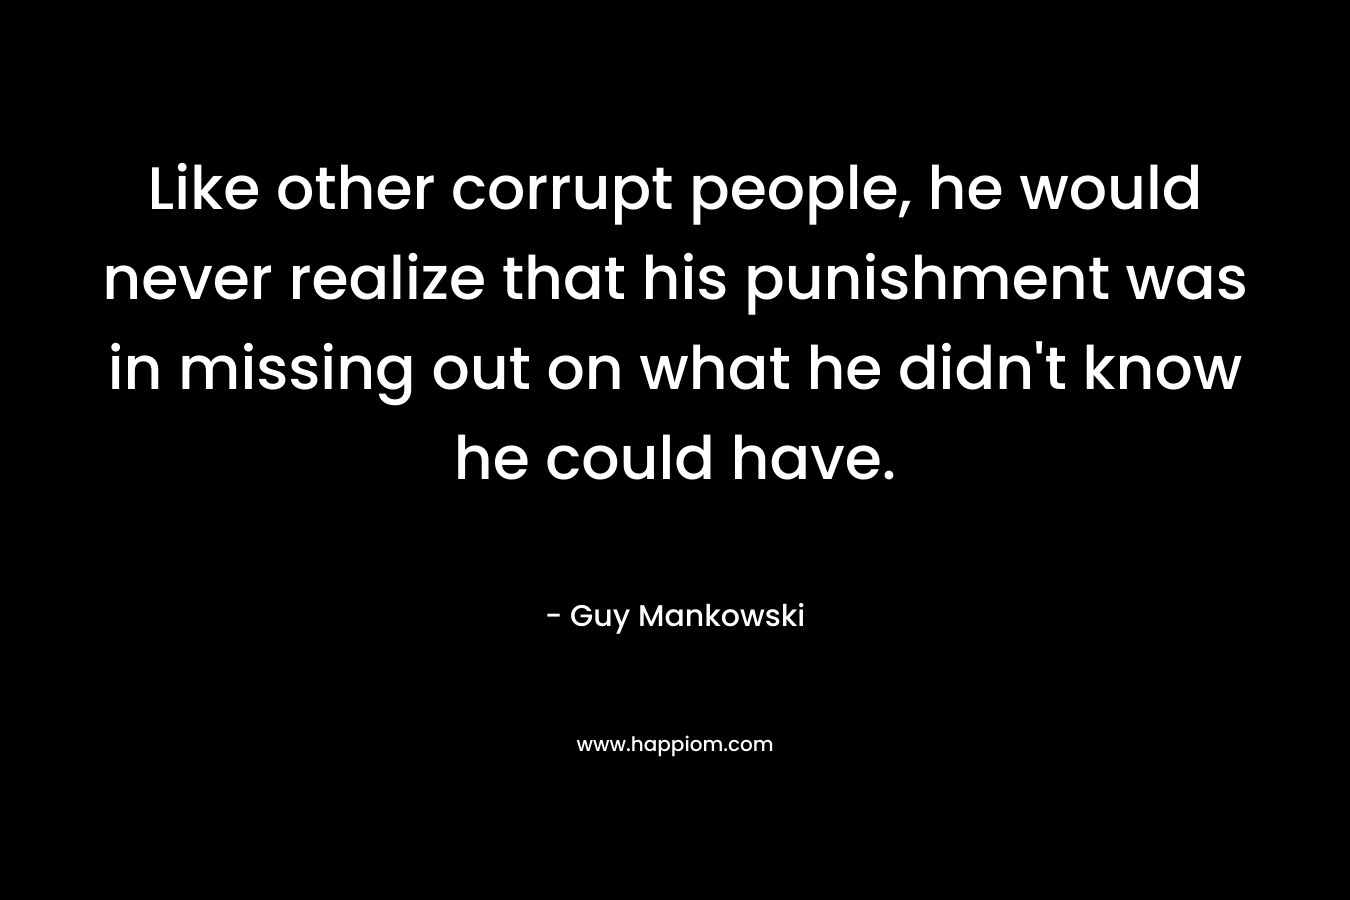 Like other corrupt people, he would never realize that his punishment was in missing out on what he didn’t know he could have. – Guy Mankowski